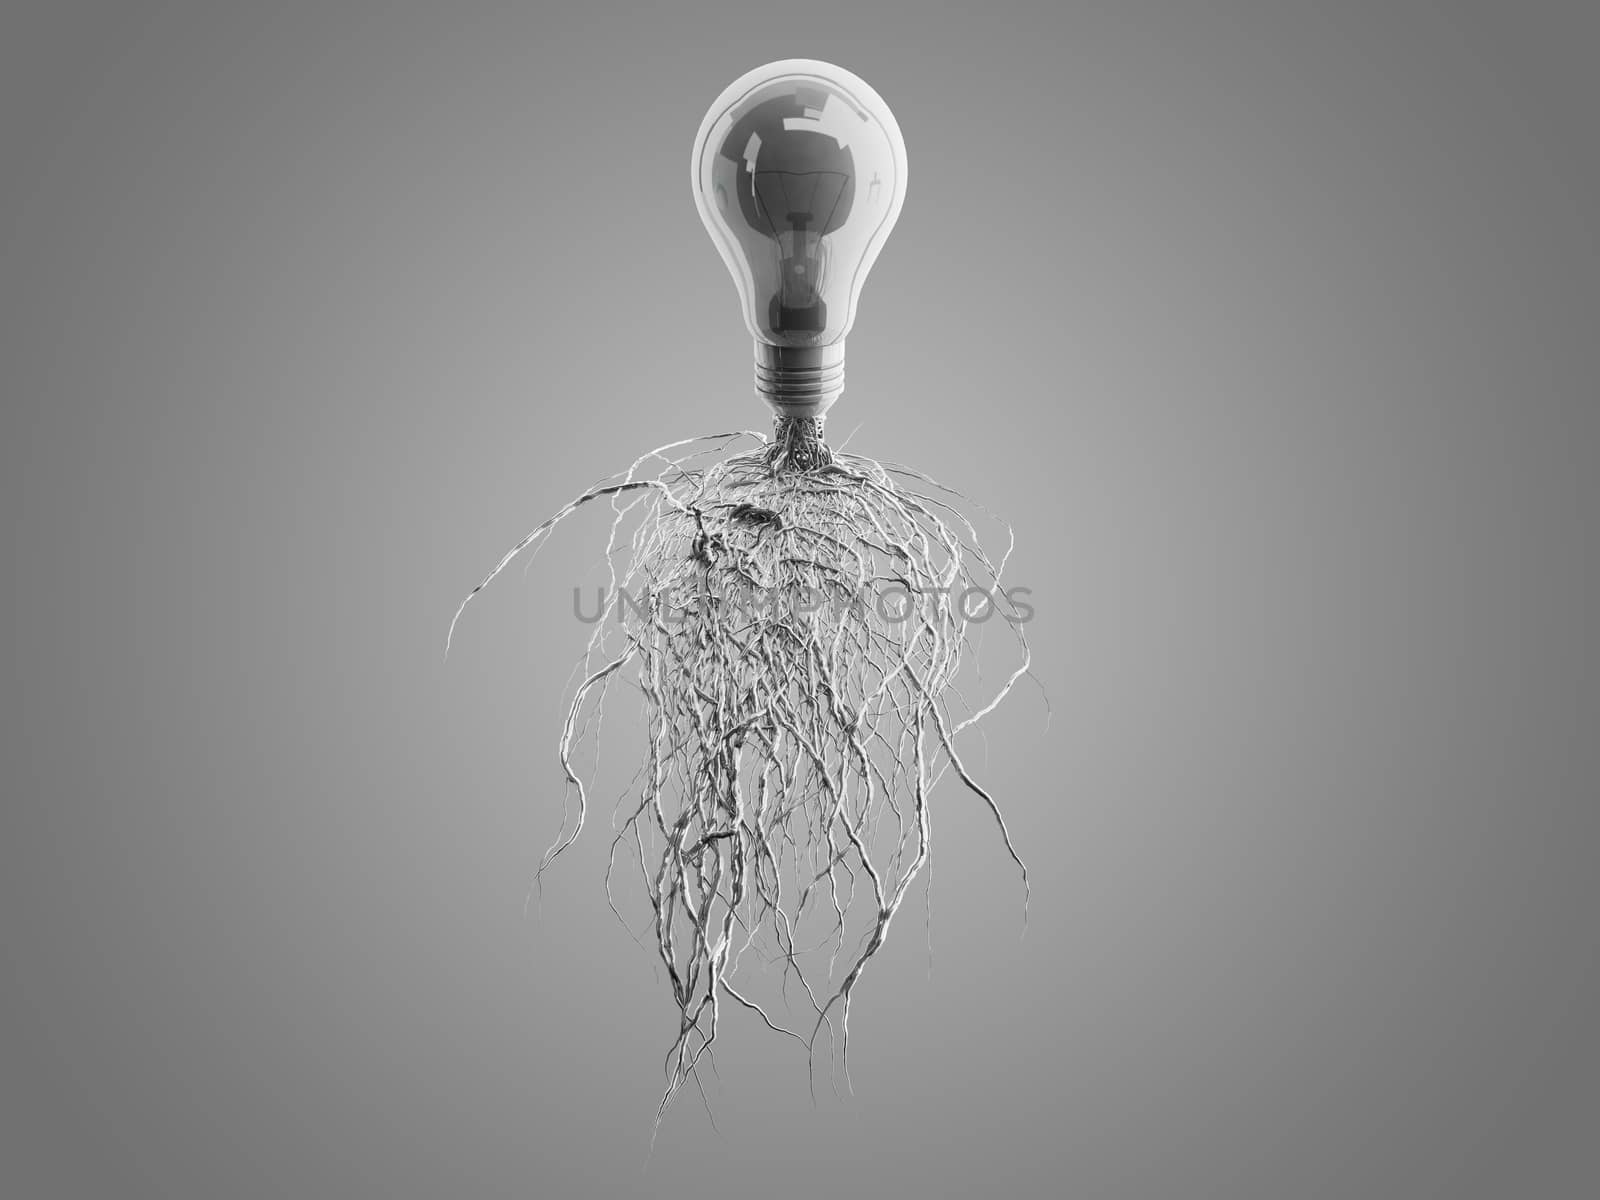 Light bulb with roots and emerged on the icon with roots. by teerawit